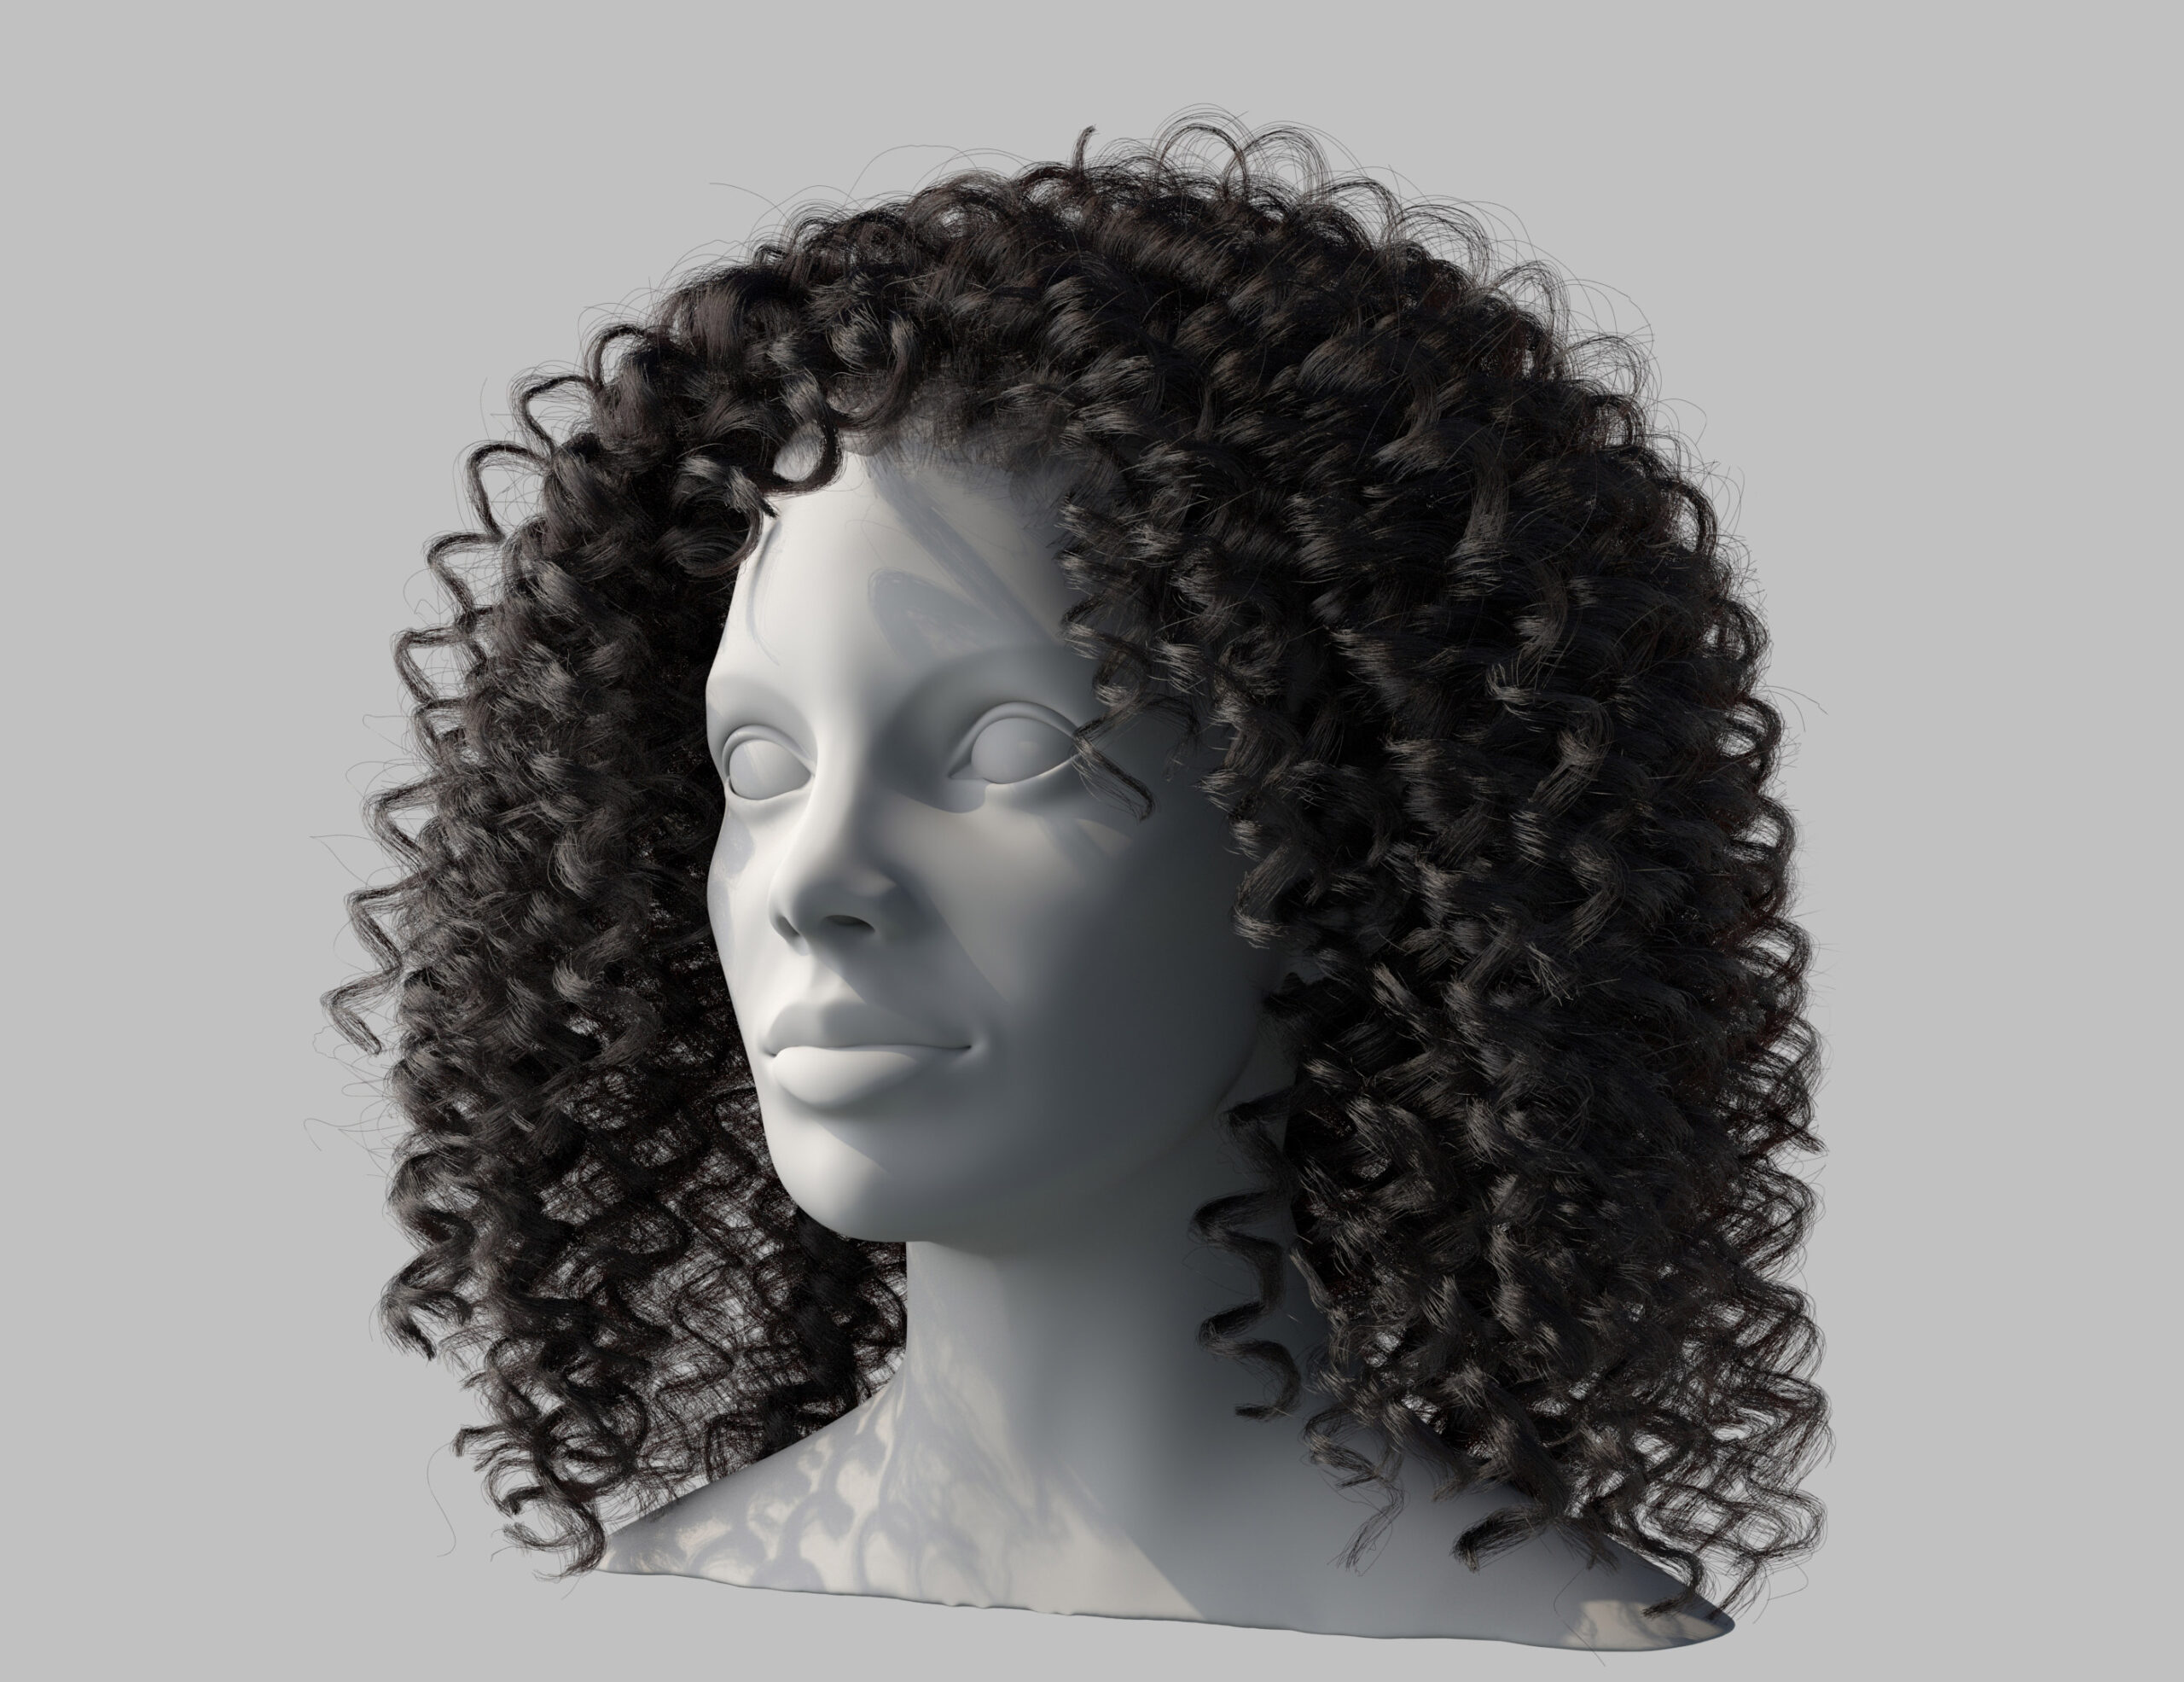 Final rendered curly/textured hair.